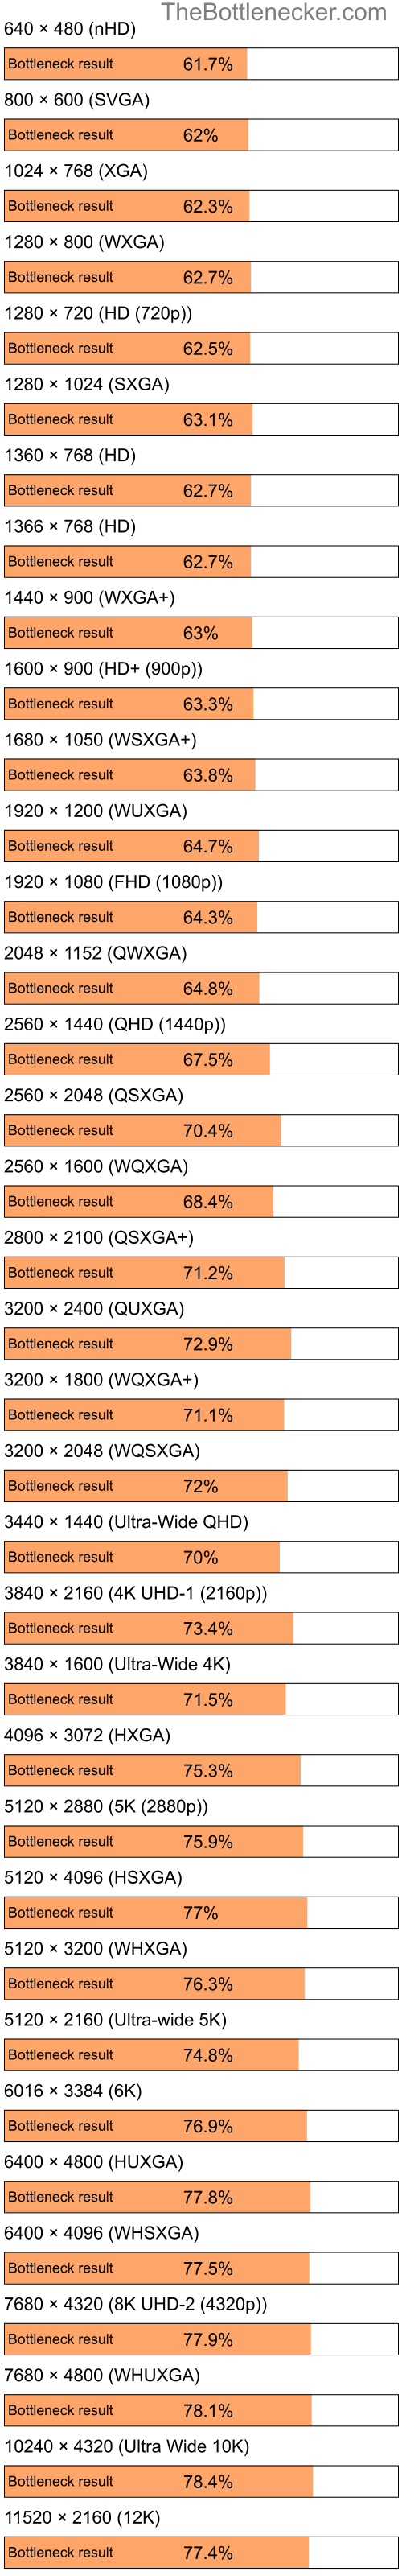 Bottleneck results by resolution for Intel Celeron and NVIDIA Quadro FX 360M in General Tasks